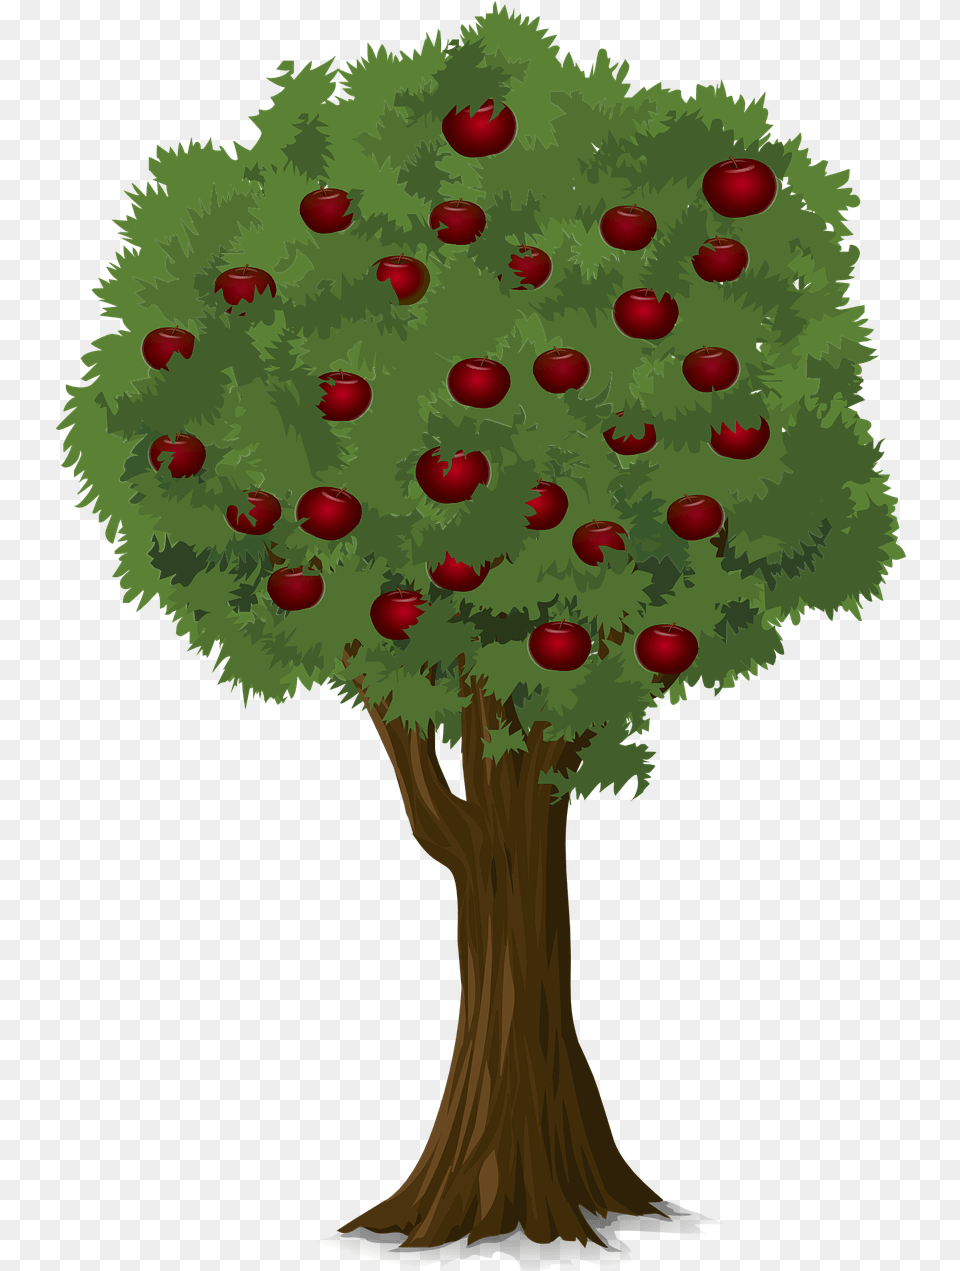 Tree Apple Nature Can Guinea Pigs Eat Apple Tree Leaves, Plant, Conifer, Vegetation, Art Free Png Download